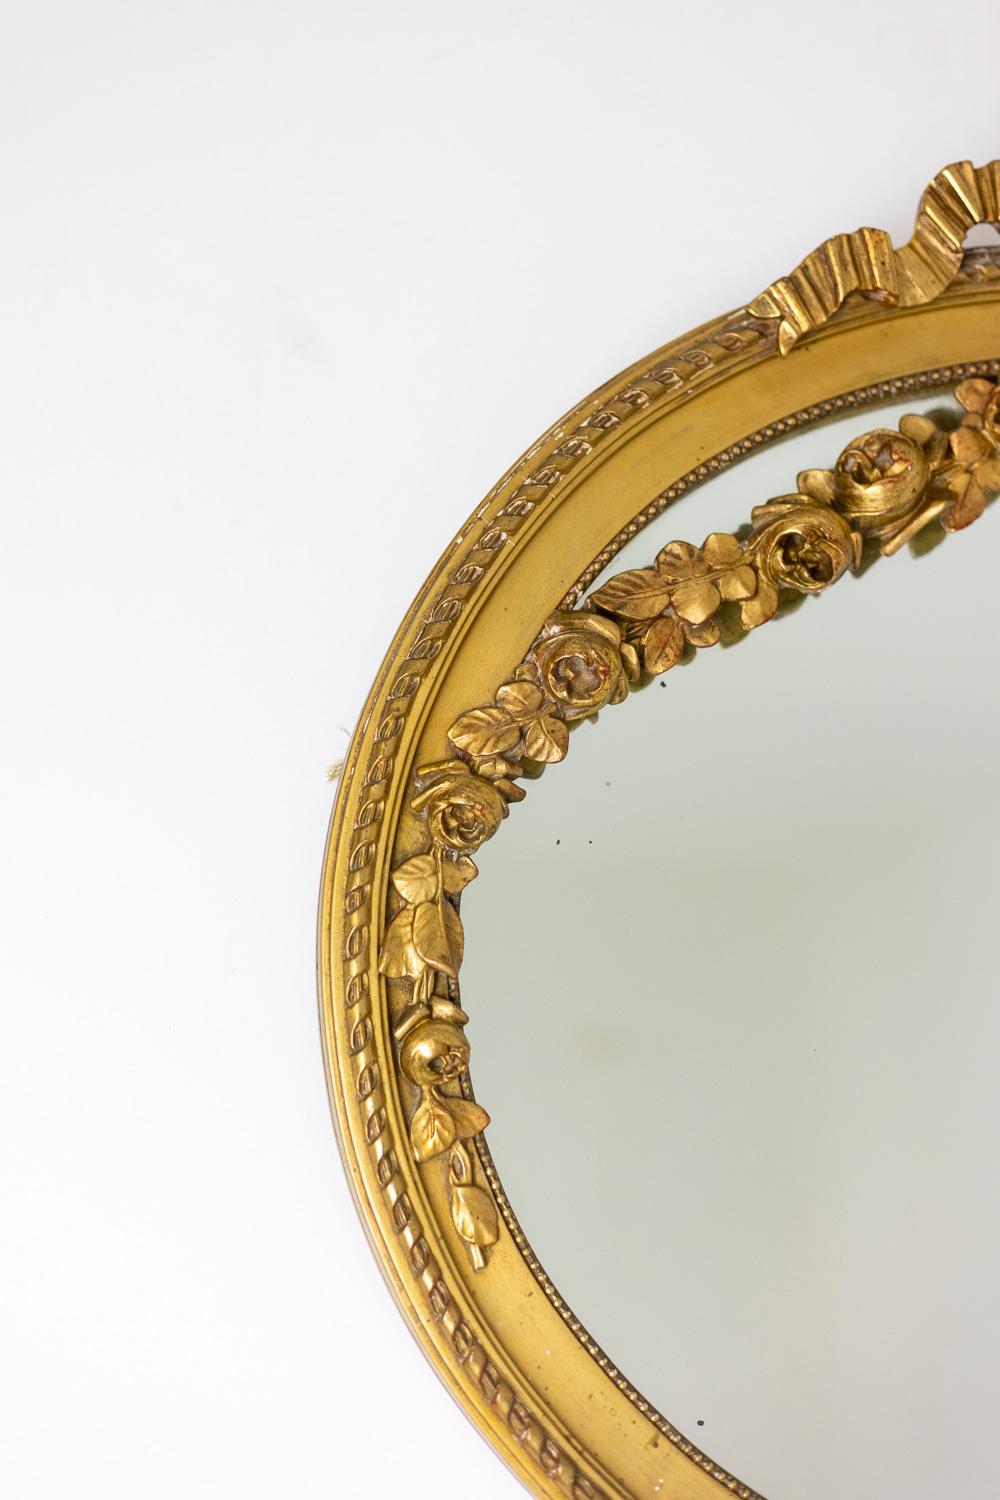 Mirror in gilded and carved wood, adorned with a ribbon, garlands of flowers and a beaded frieze, oval in shape.

French work realized circa 1880.

Dimensions : H 66 x L 68 x P 7 cm.

